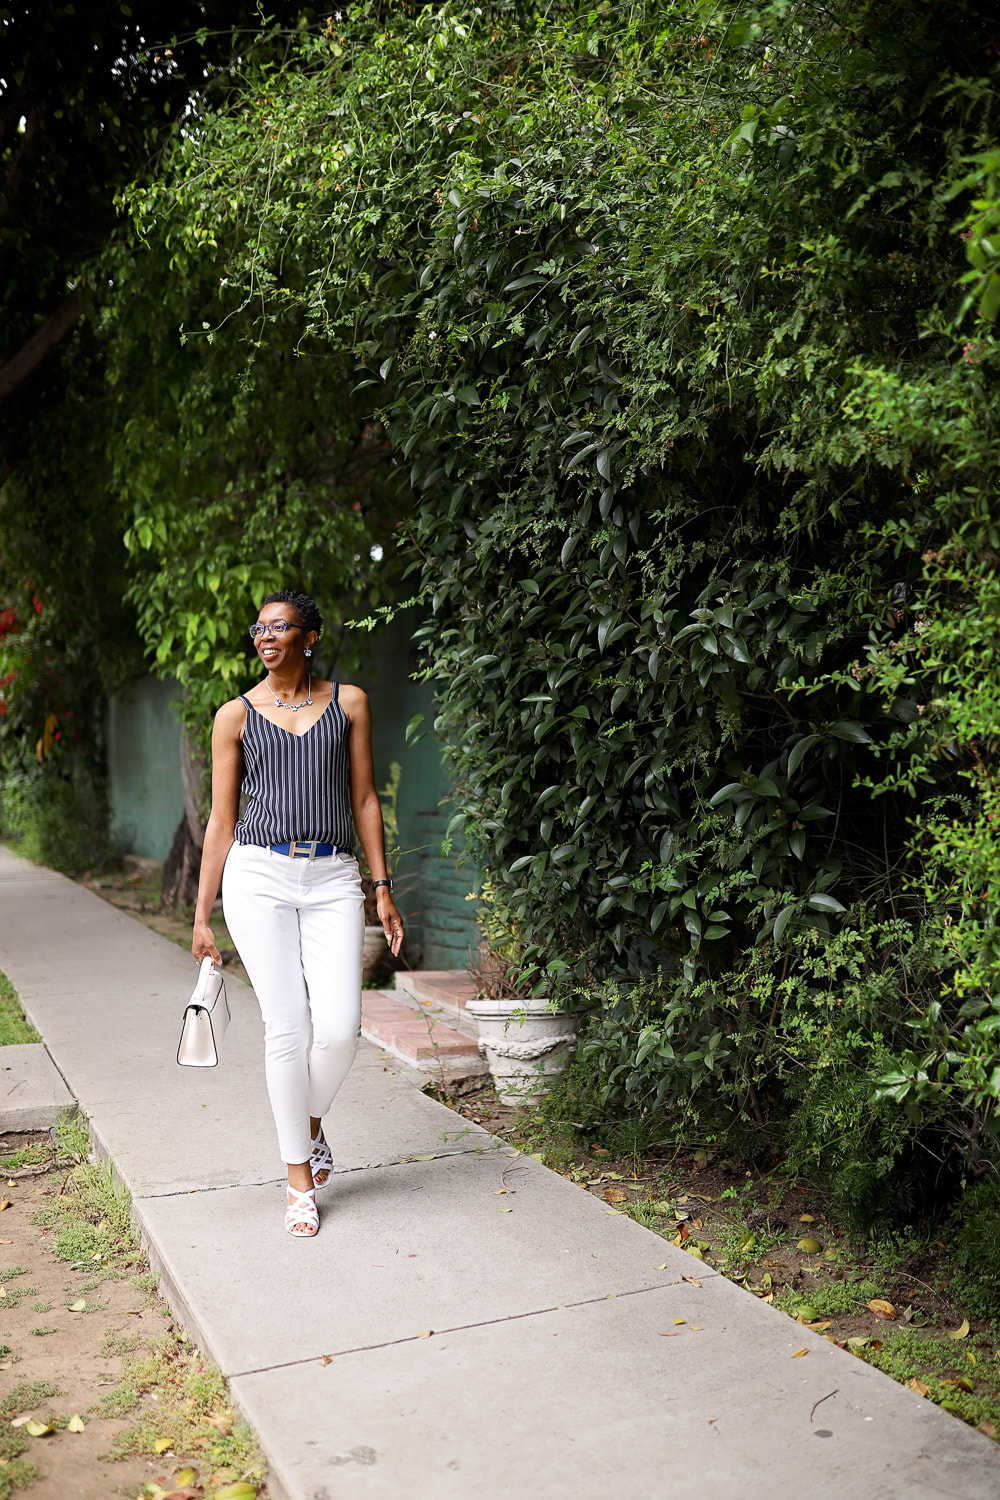 Tamieka Smith is walking along the streets of Beverly Hills